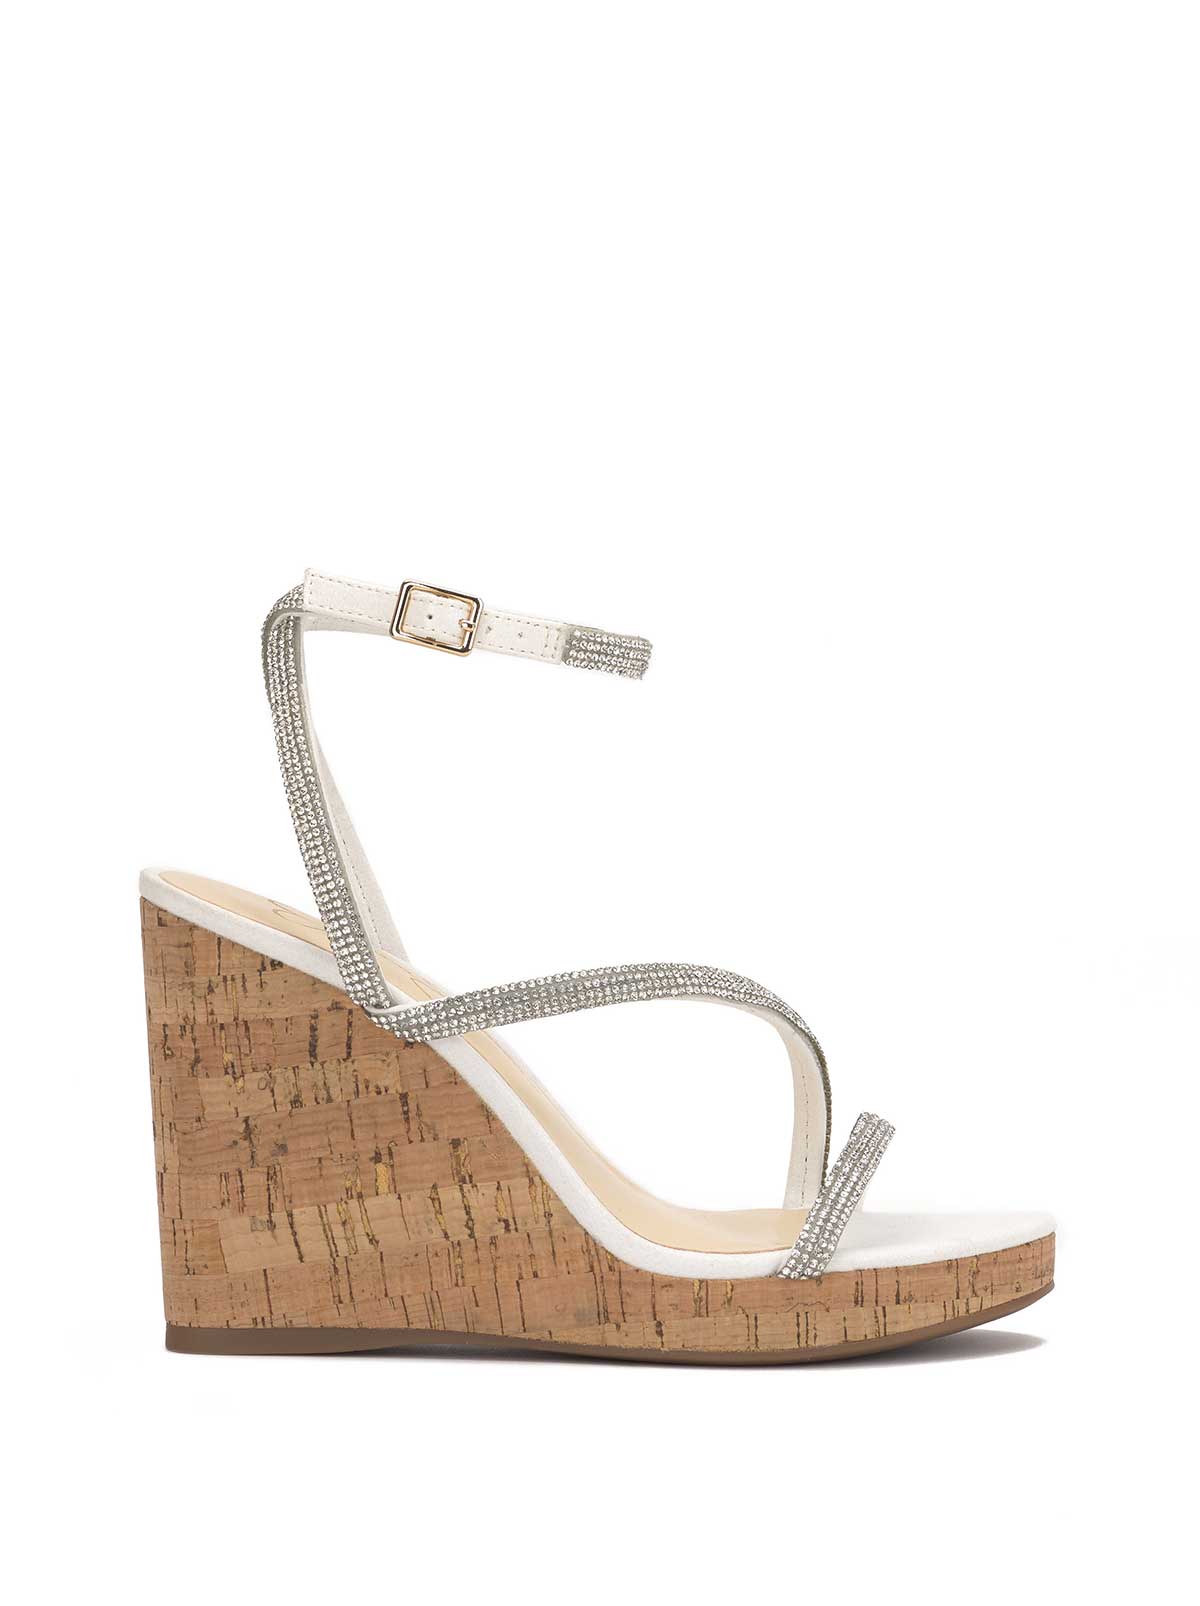 Image of Tenley Embellished Wedge in White